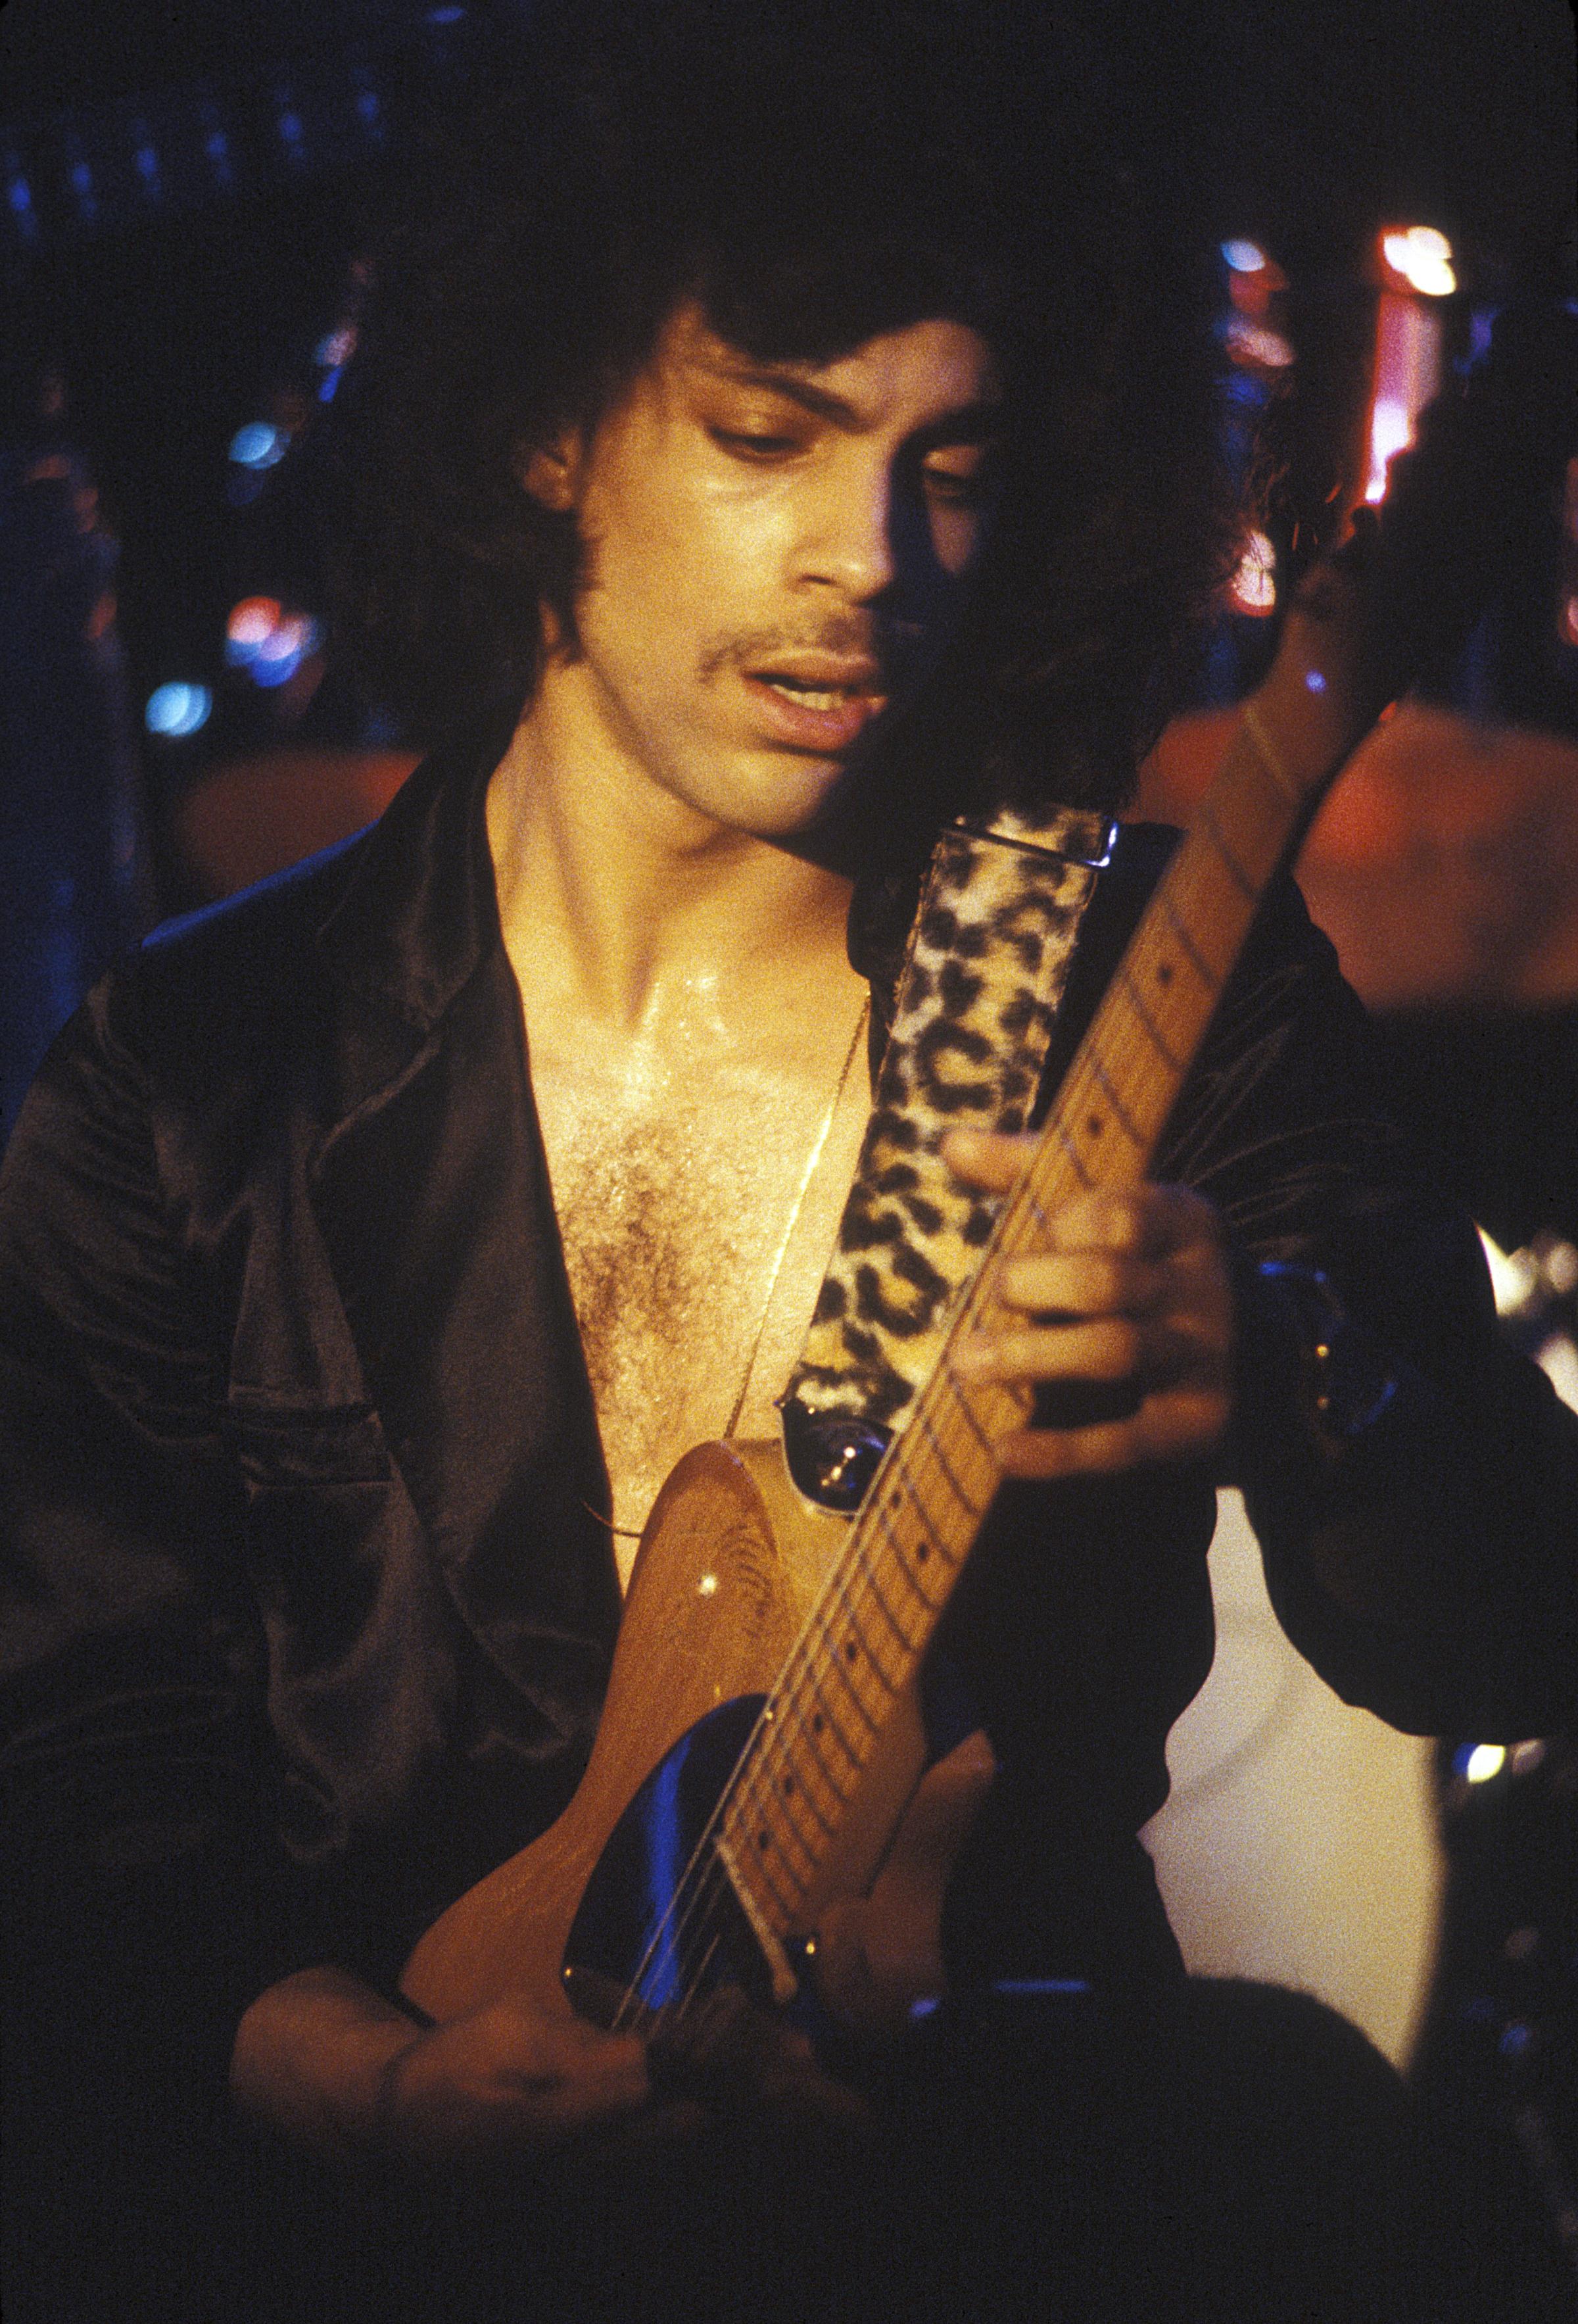 Prince performs at the Bottom Line on Feb. 15, 1980 in New York City.